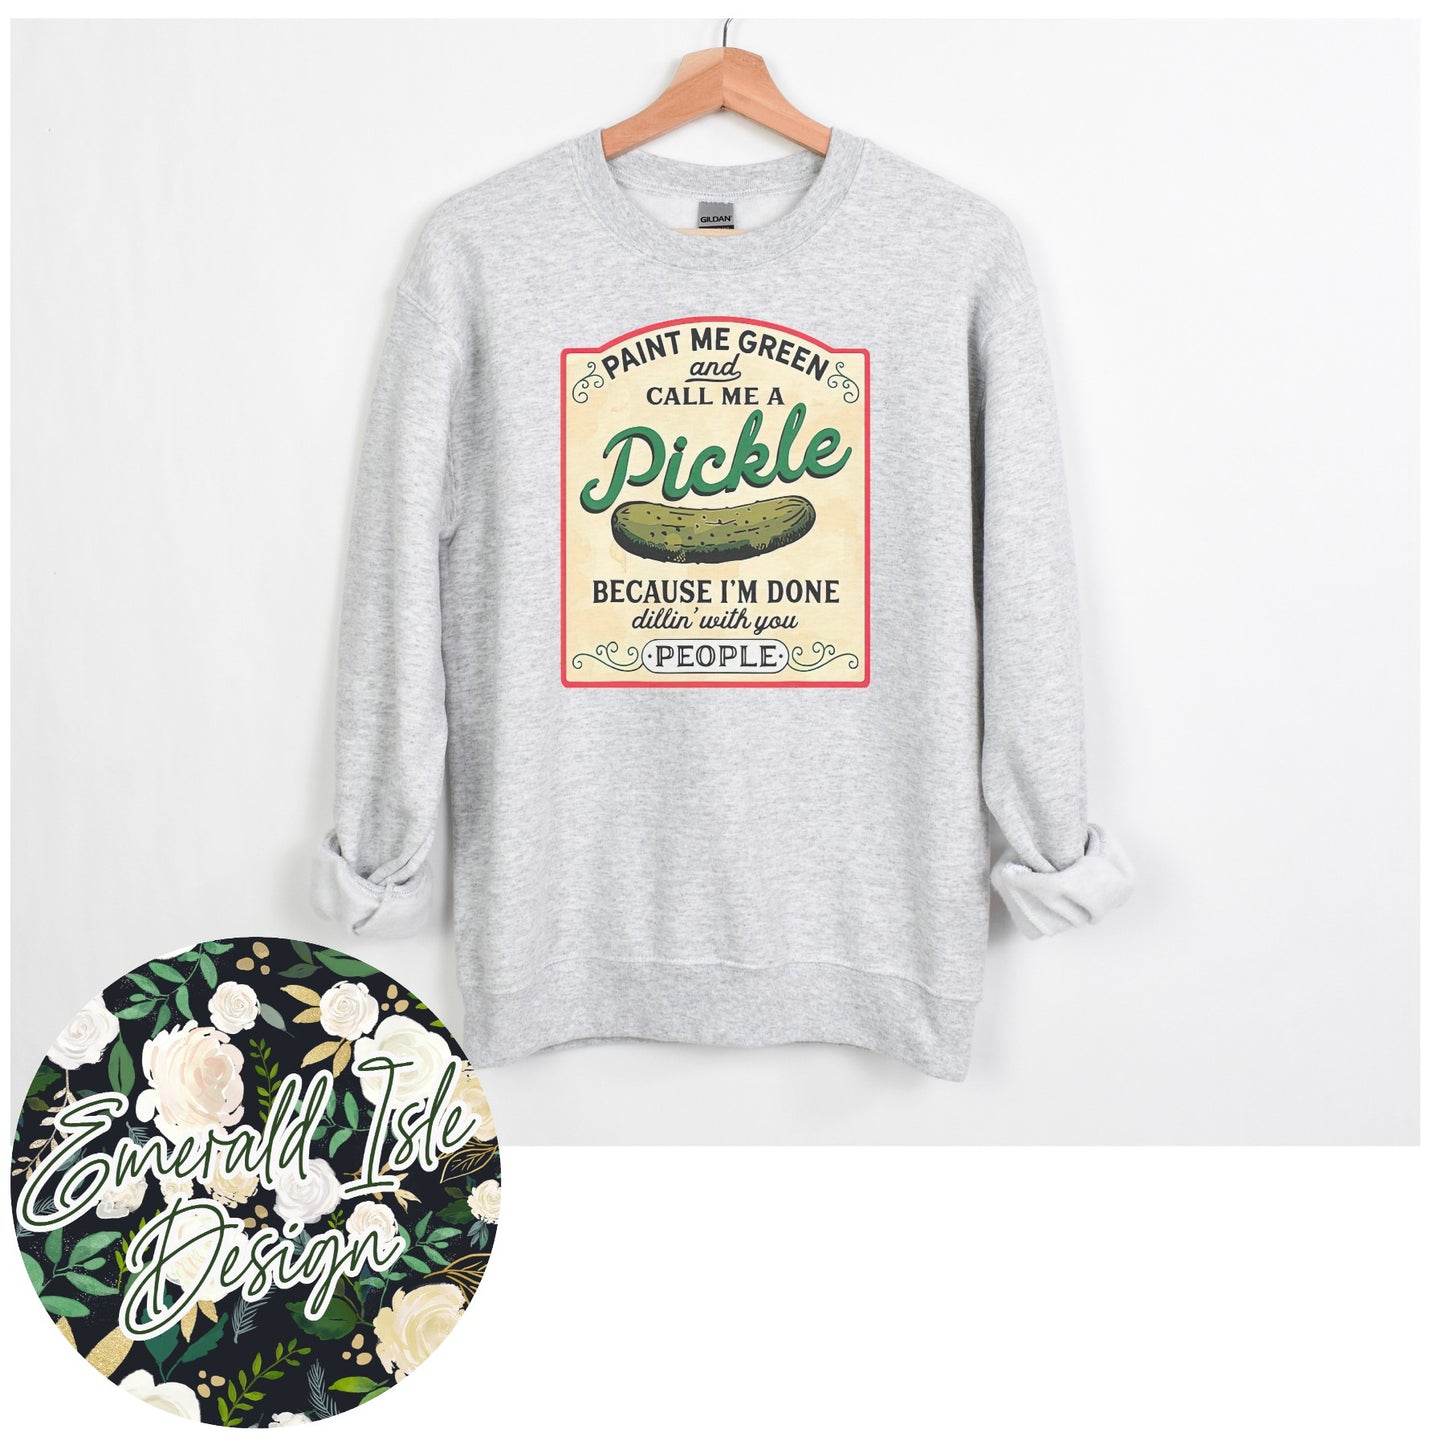 Paint Me Green and Call Me a Pickle Because I'm Done Dillin' with You People Sweatshirt